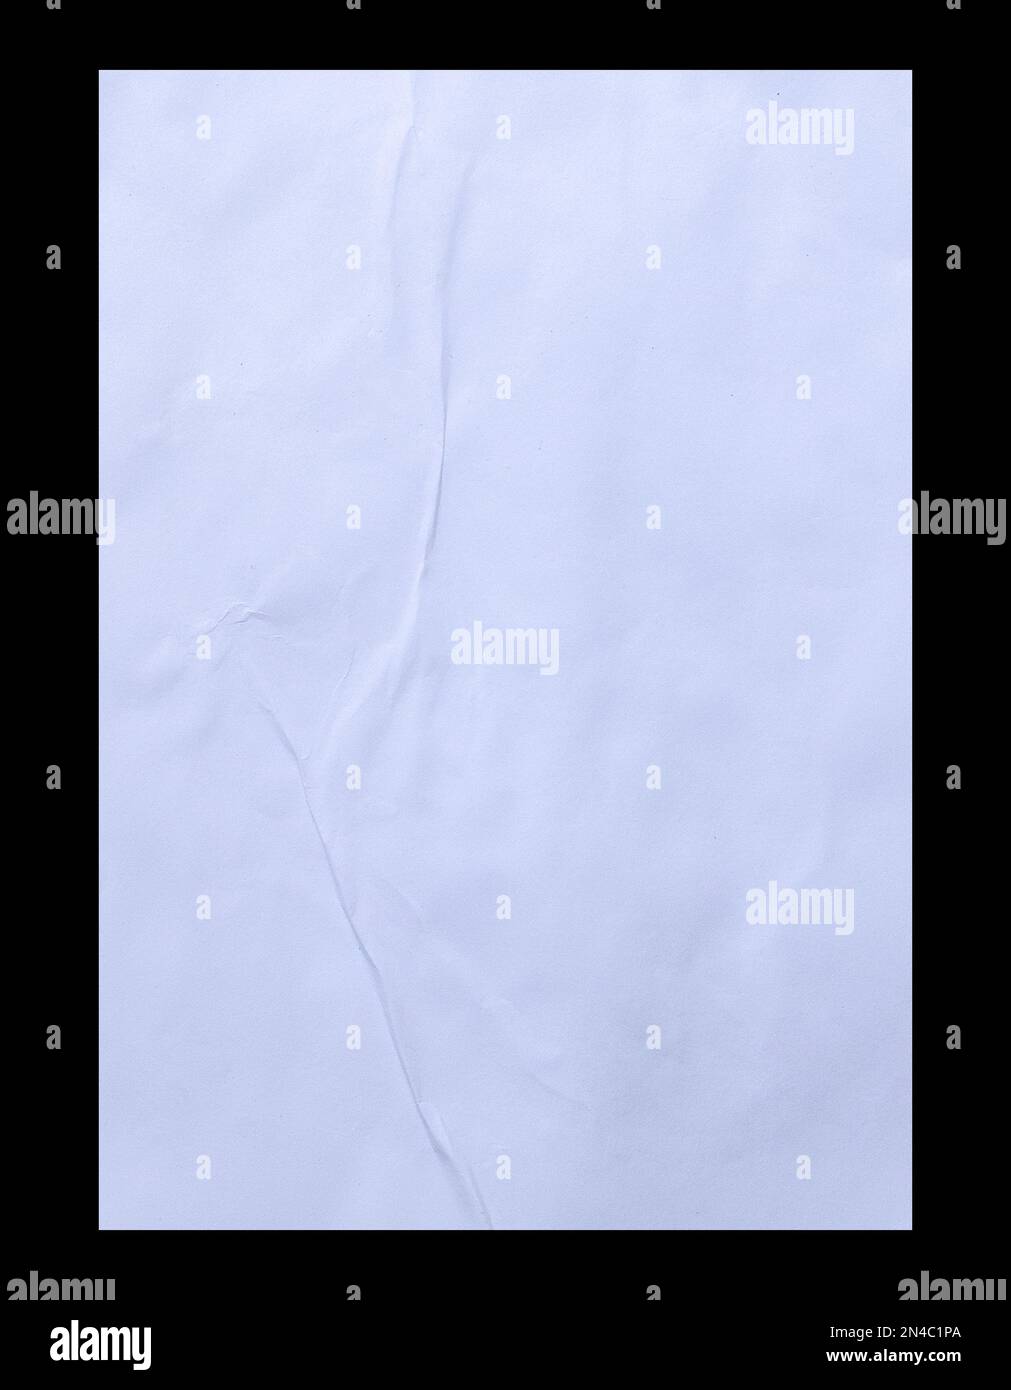 Blank white crumpled and creased paper poster texture isolated on